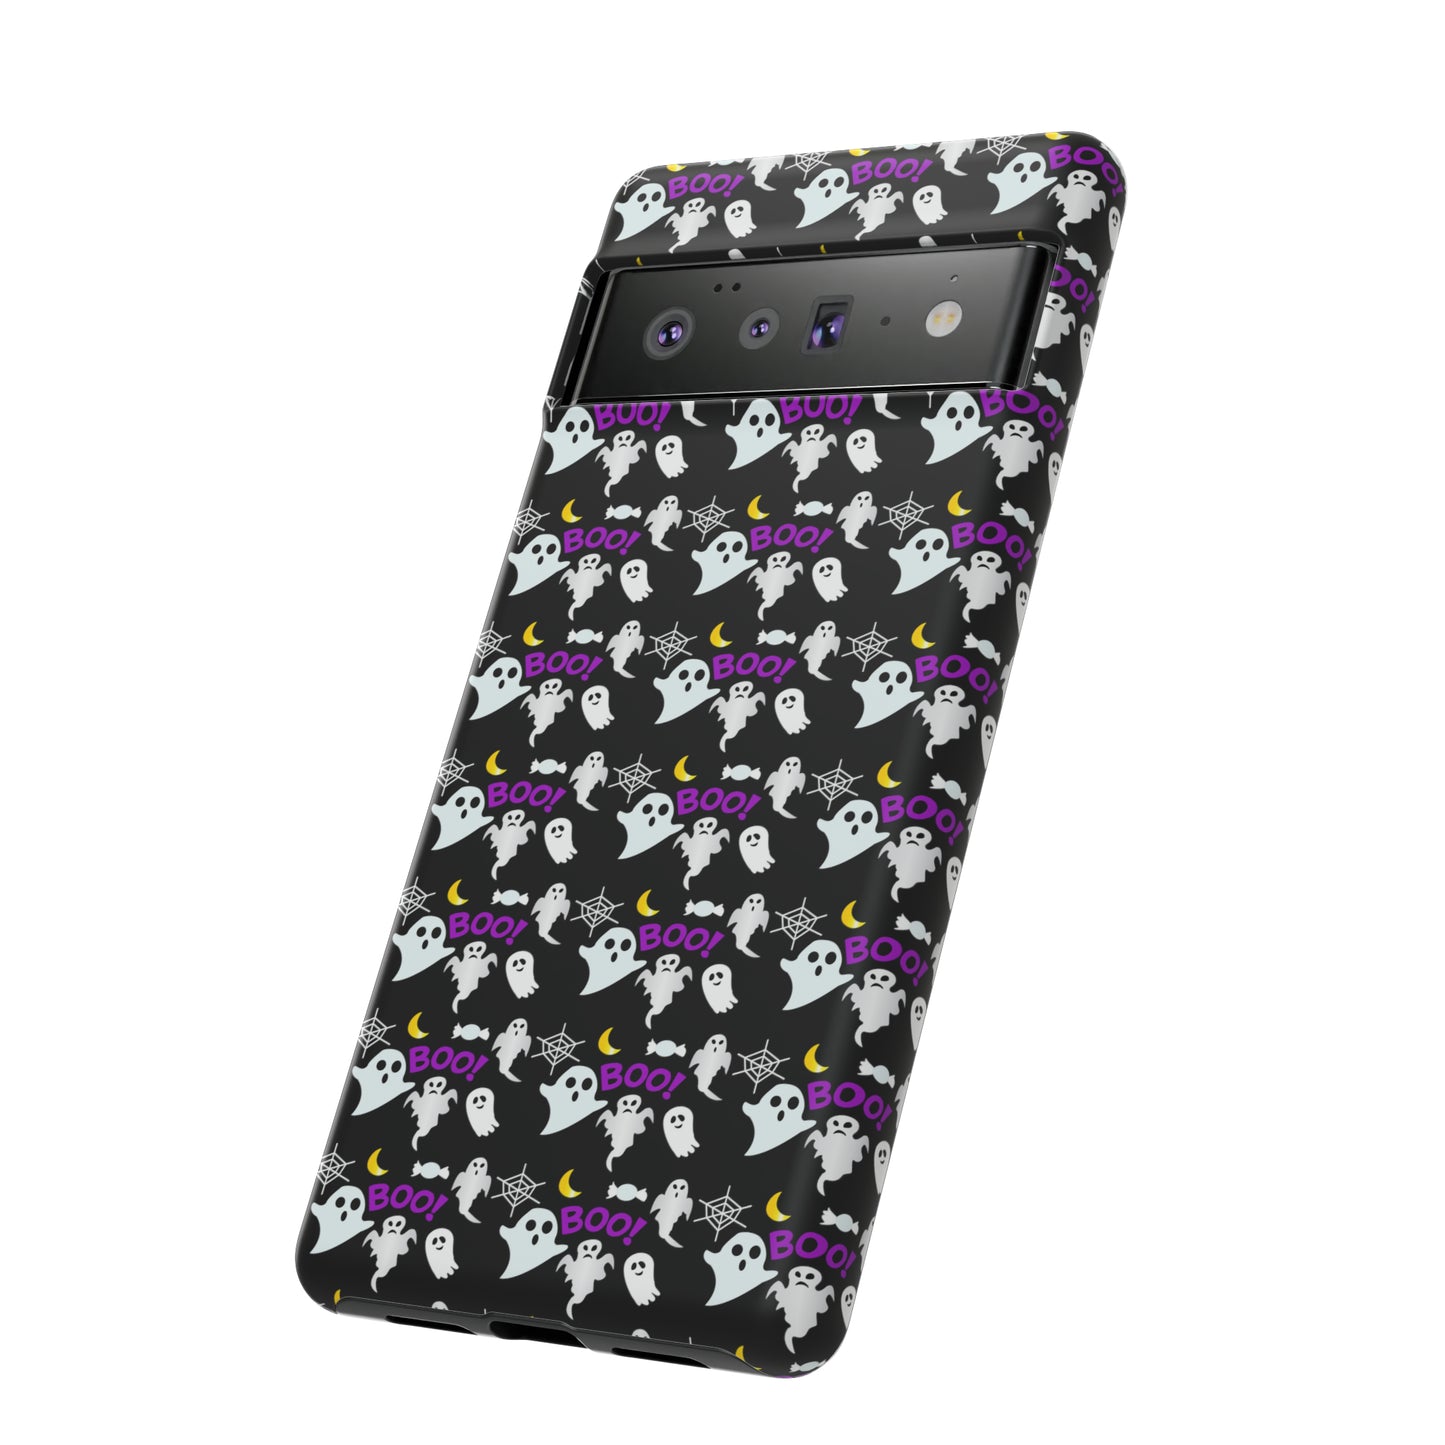 Ghost Halloween iPhone Case, Cute Goth Cell Phone Case, Ghost iPhone Case,